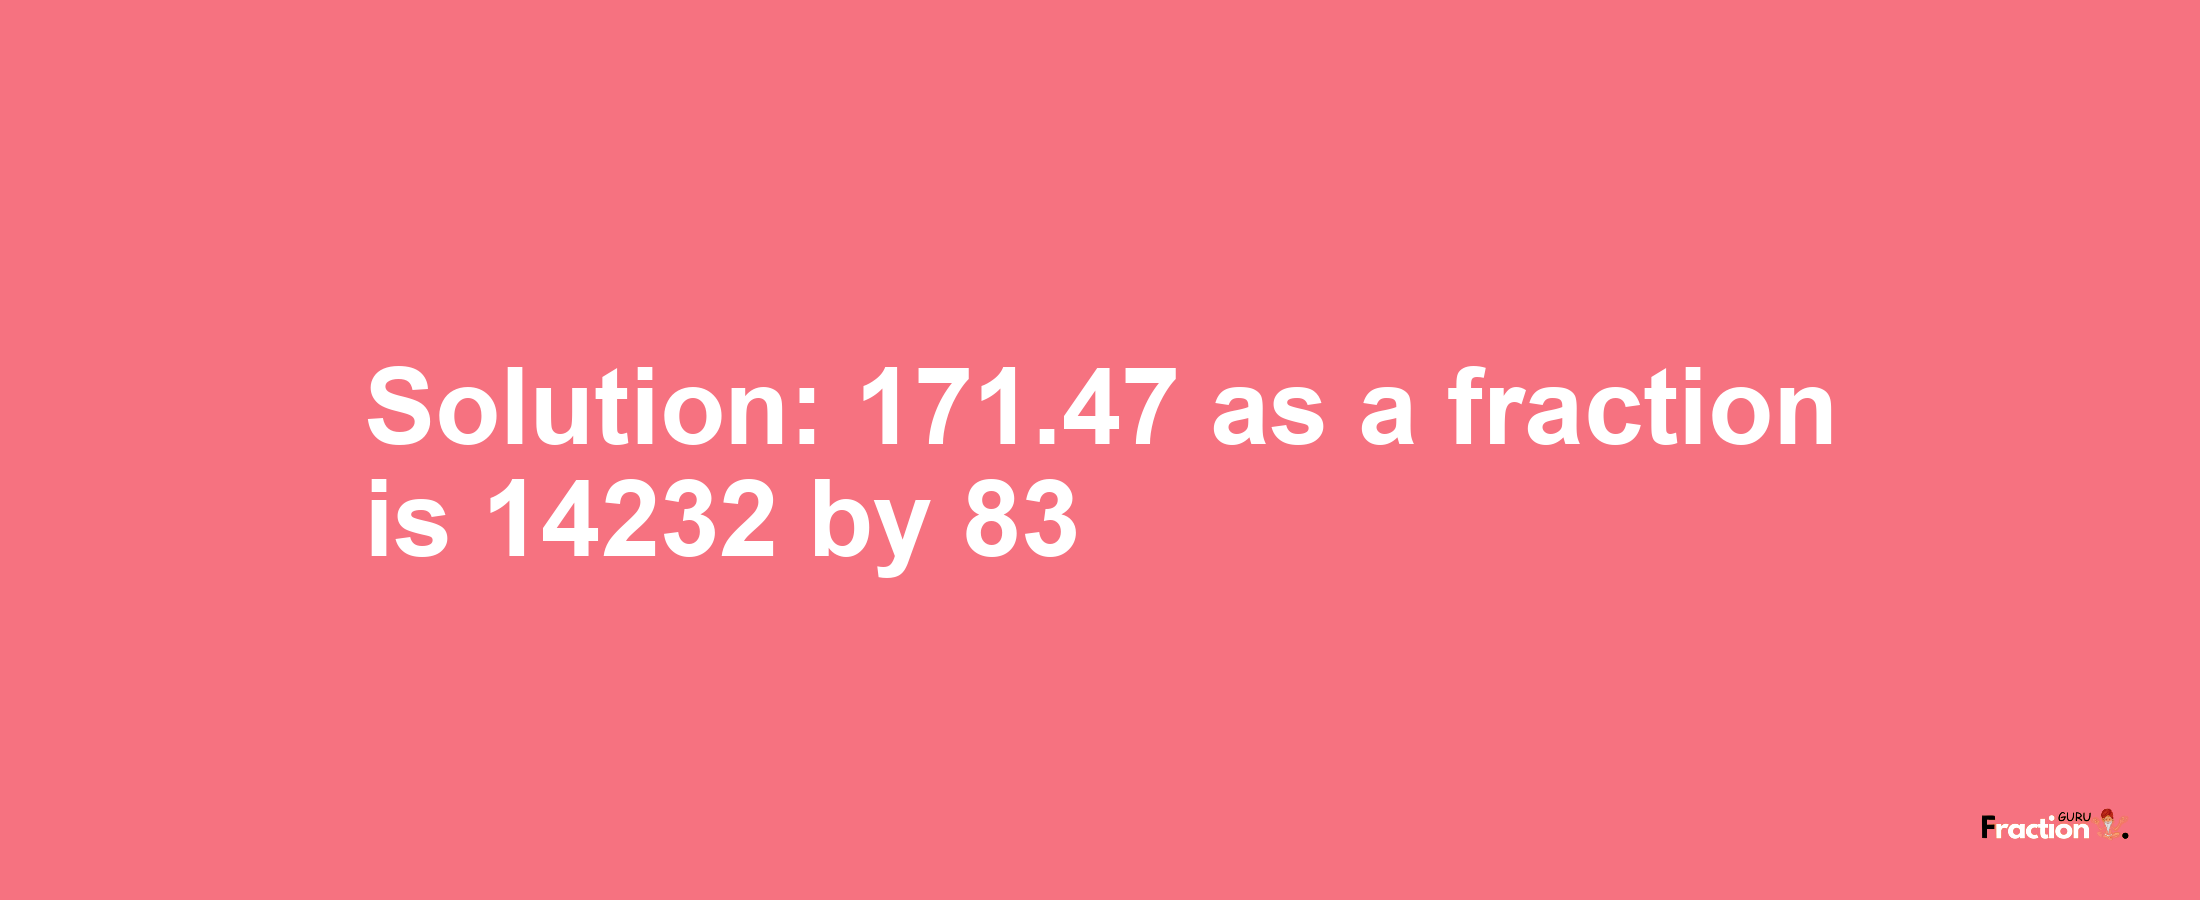 Solution:171.47 as a fraction is 14232/83